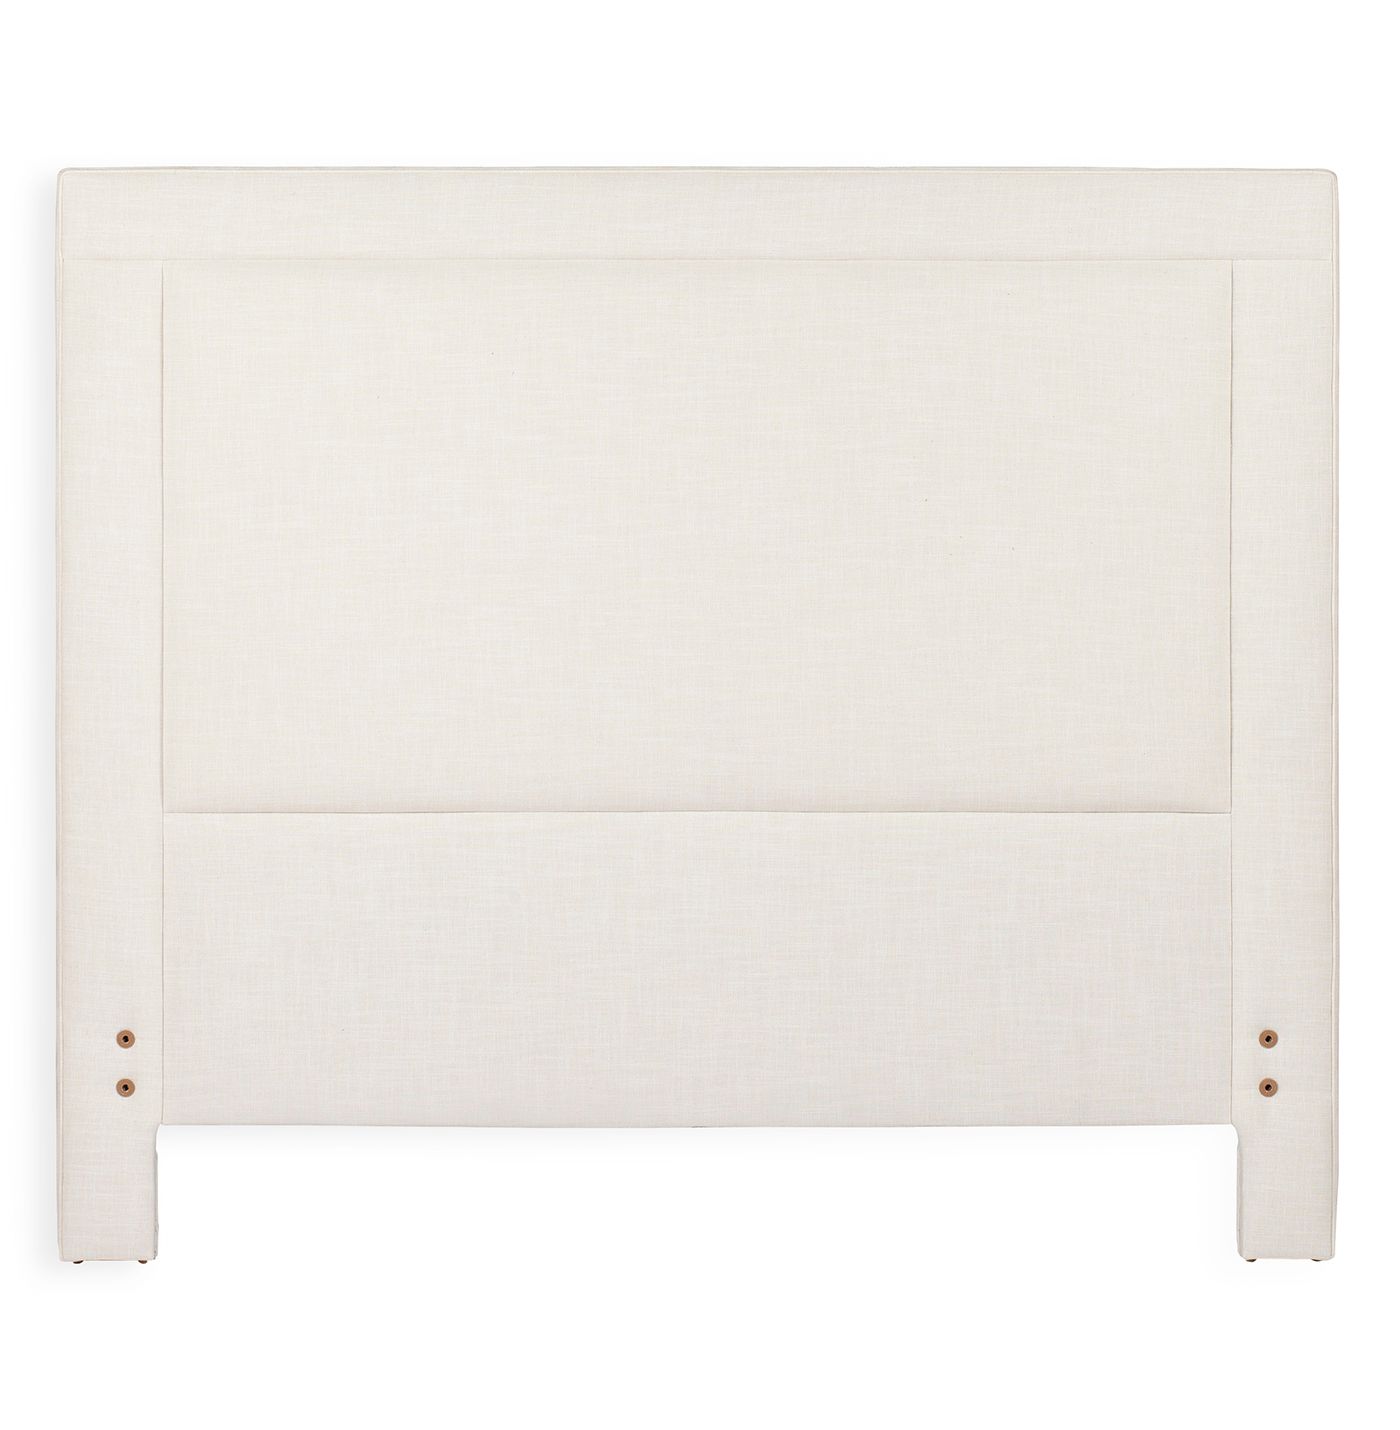 Sloan Modern Classic Square Banded Ivory Linen Headboard- Queen | Kathy Kuo Home